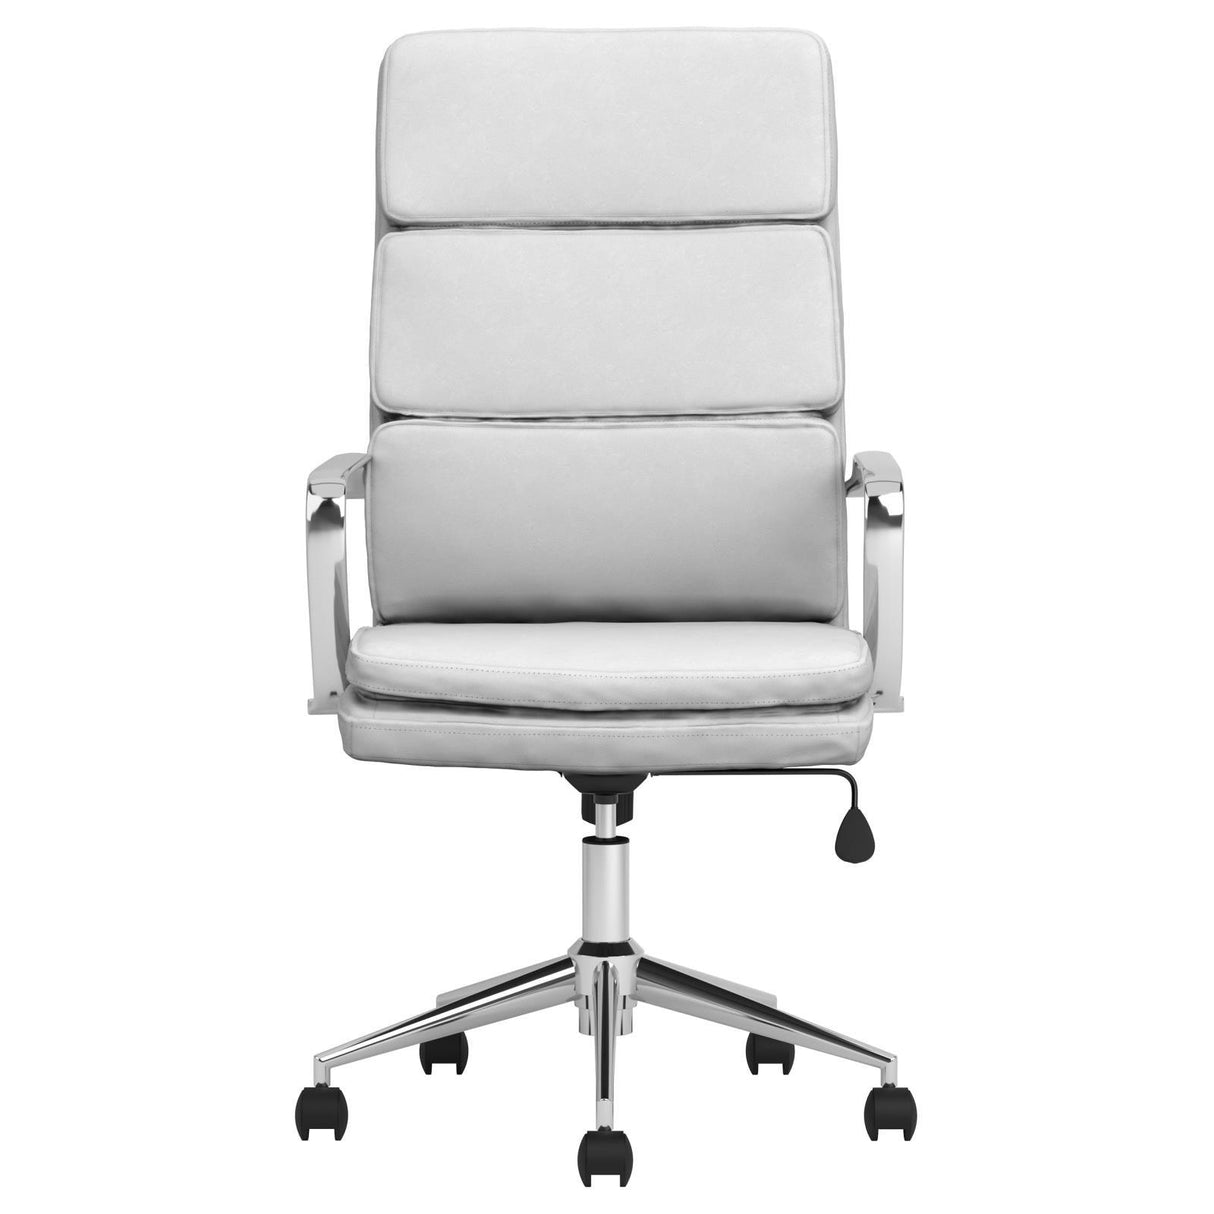 Chrome Upholstered Office Chair 801746 - Ella Furniture